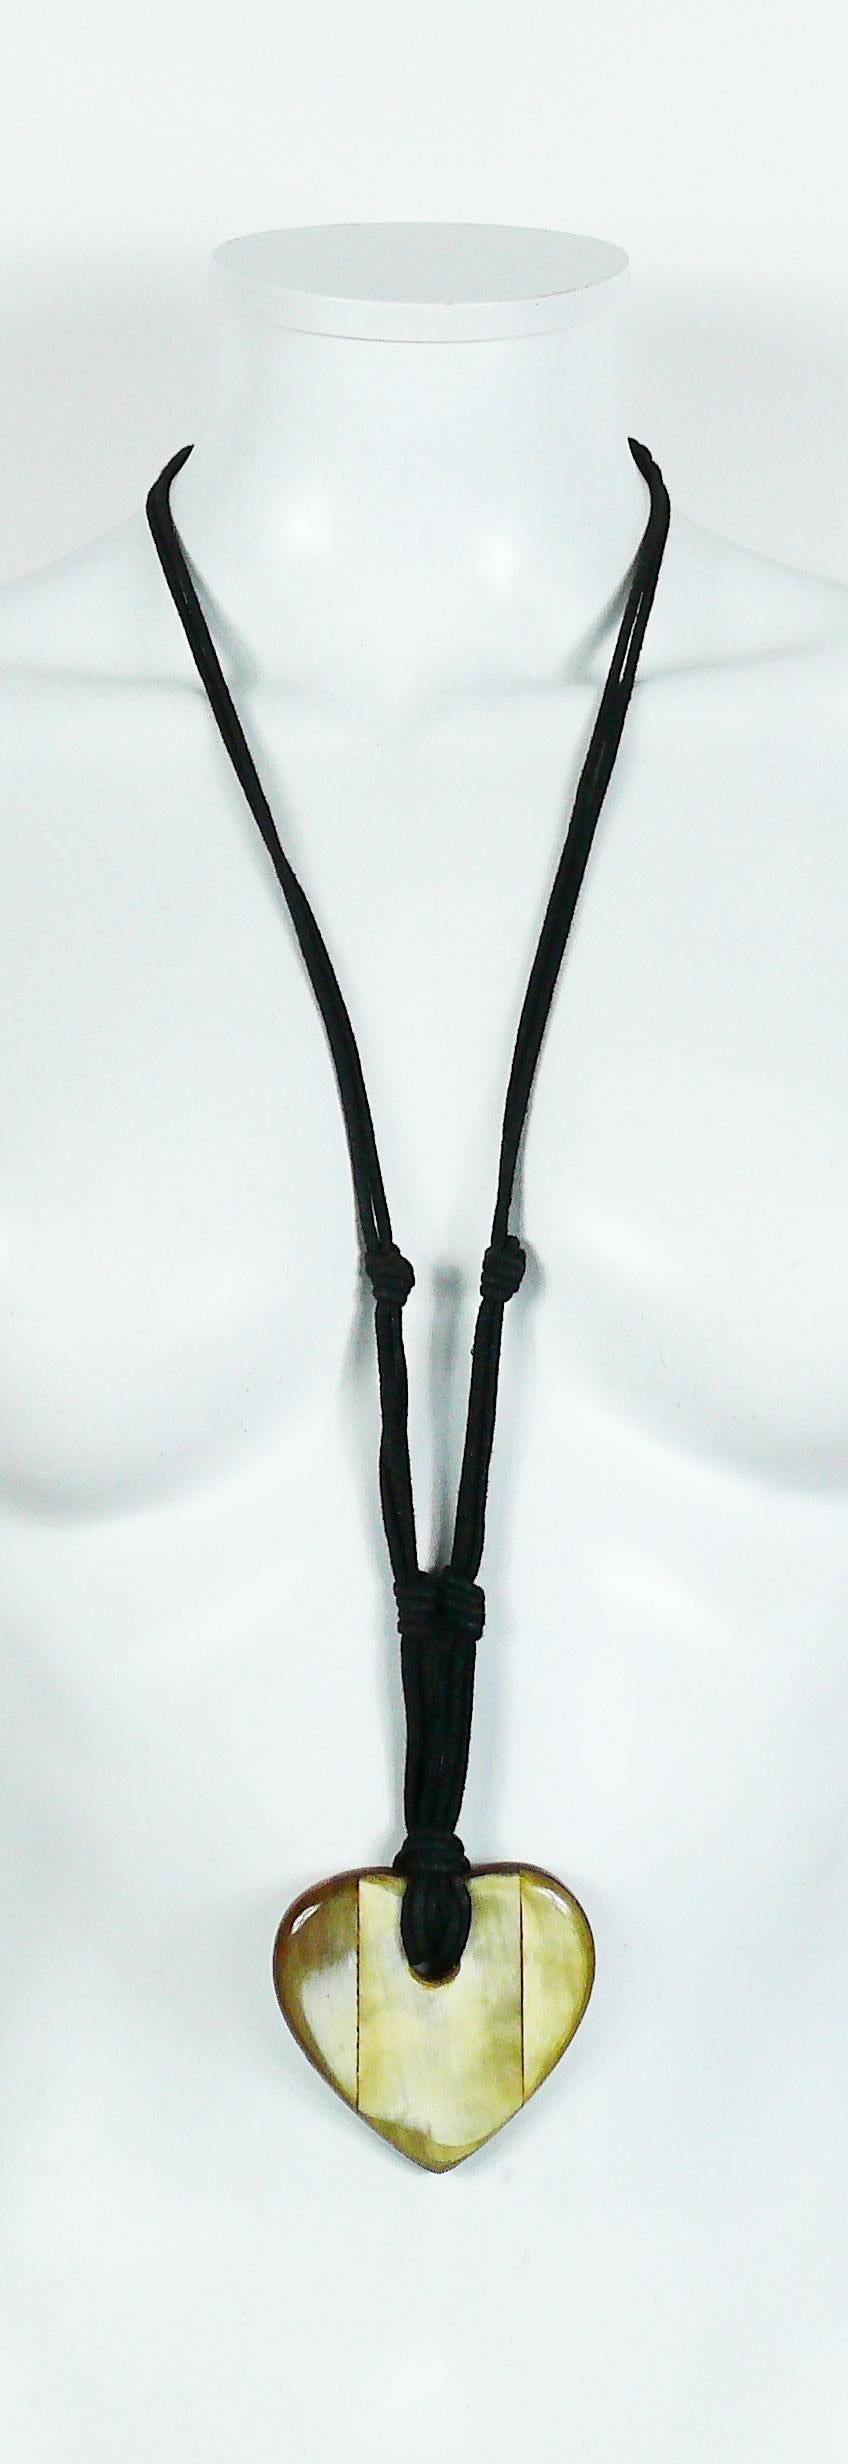 YVES SAINT LAURENT pendant necklace featuring a large wood and faux horn heart with black rope.

Marked YVES SAINT LAURENT Rive Gauche.

Indicative measurements : length worn approx. 40 cm (15.75 inches) / heart approx. 6.5 cm x 6.5 cm (2.56 inches